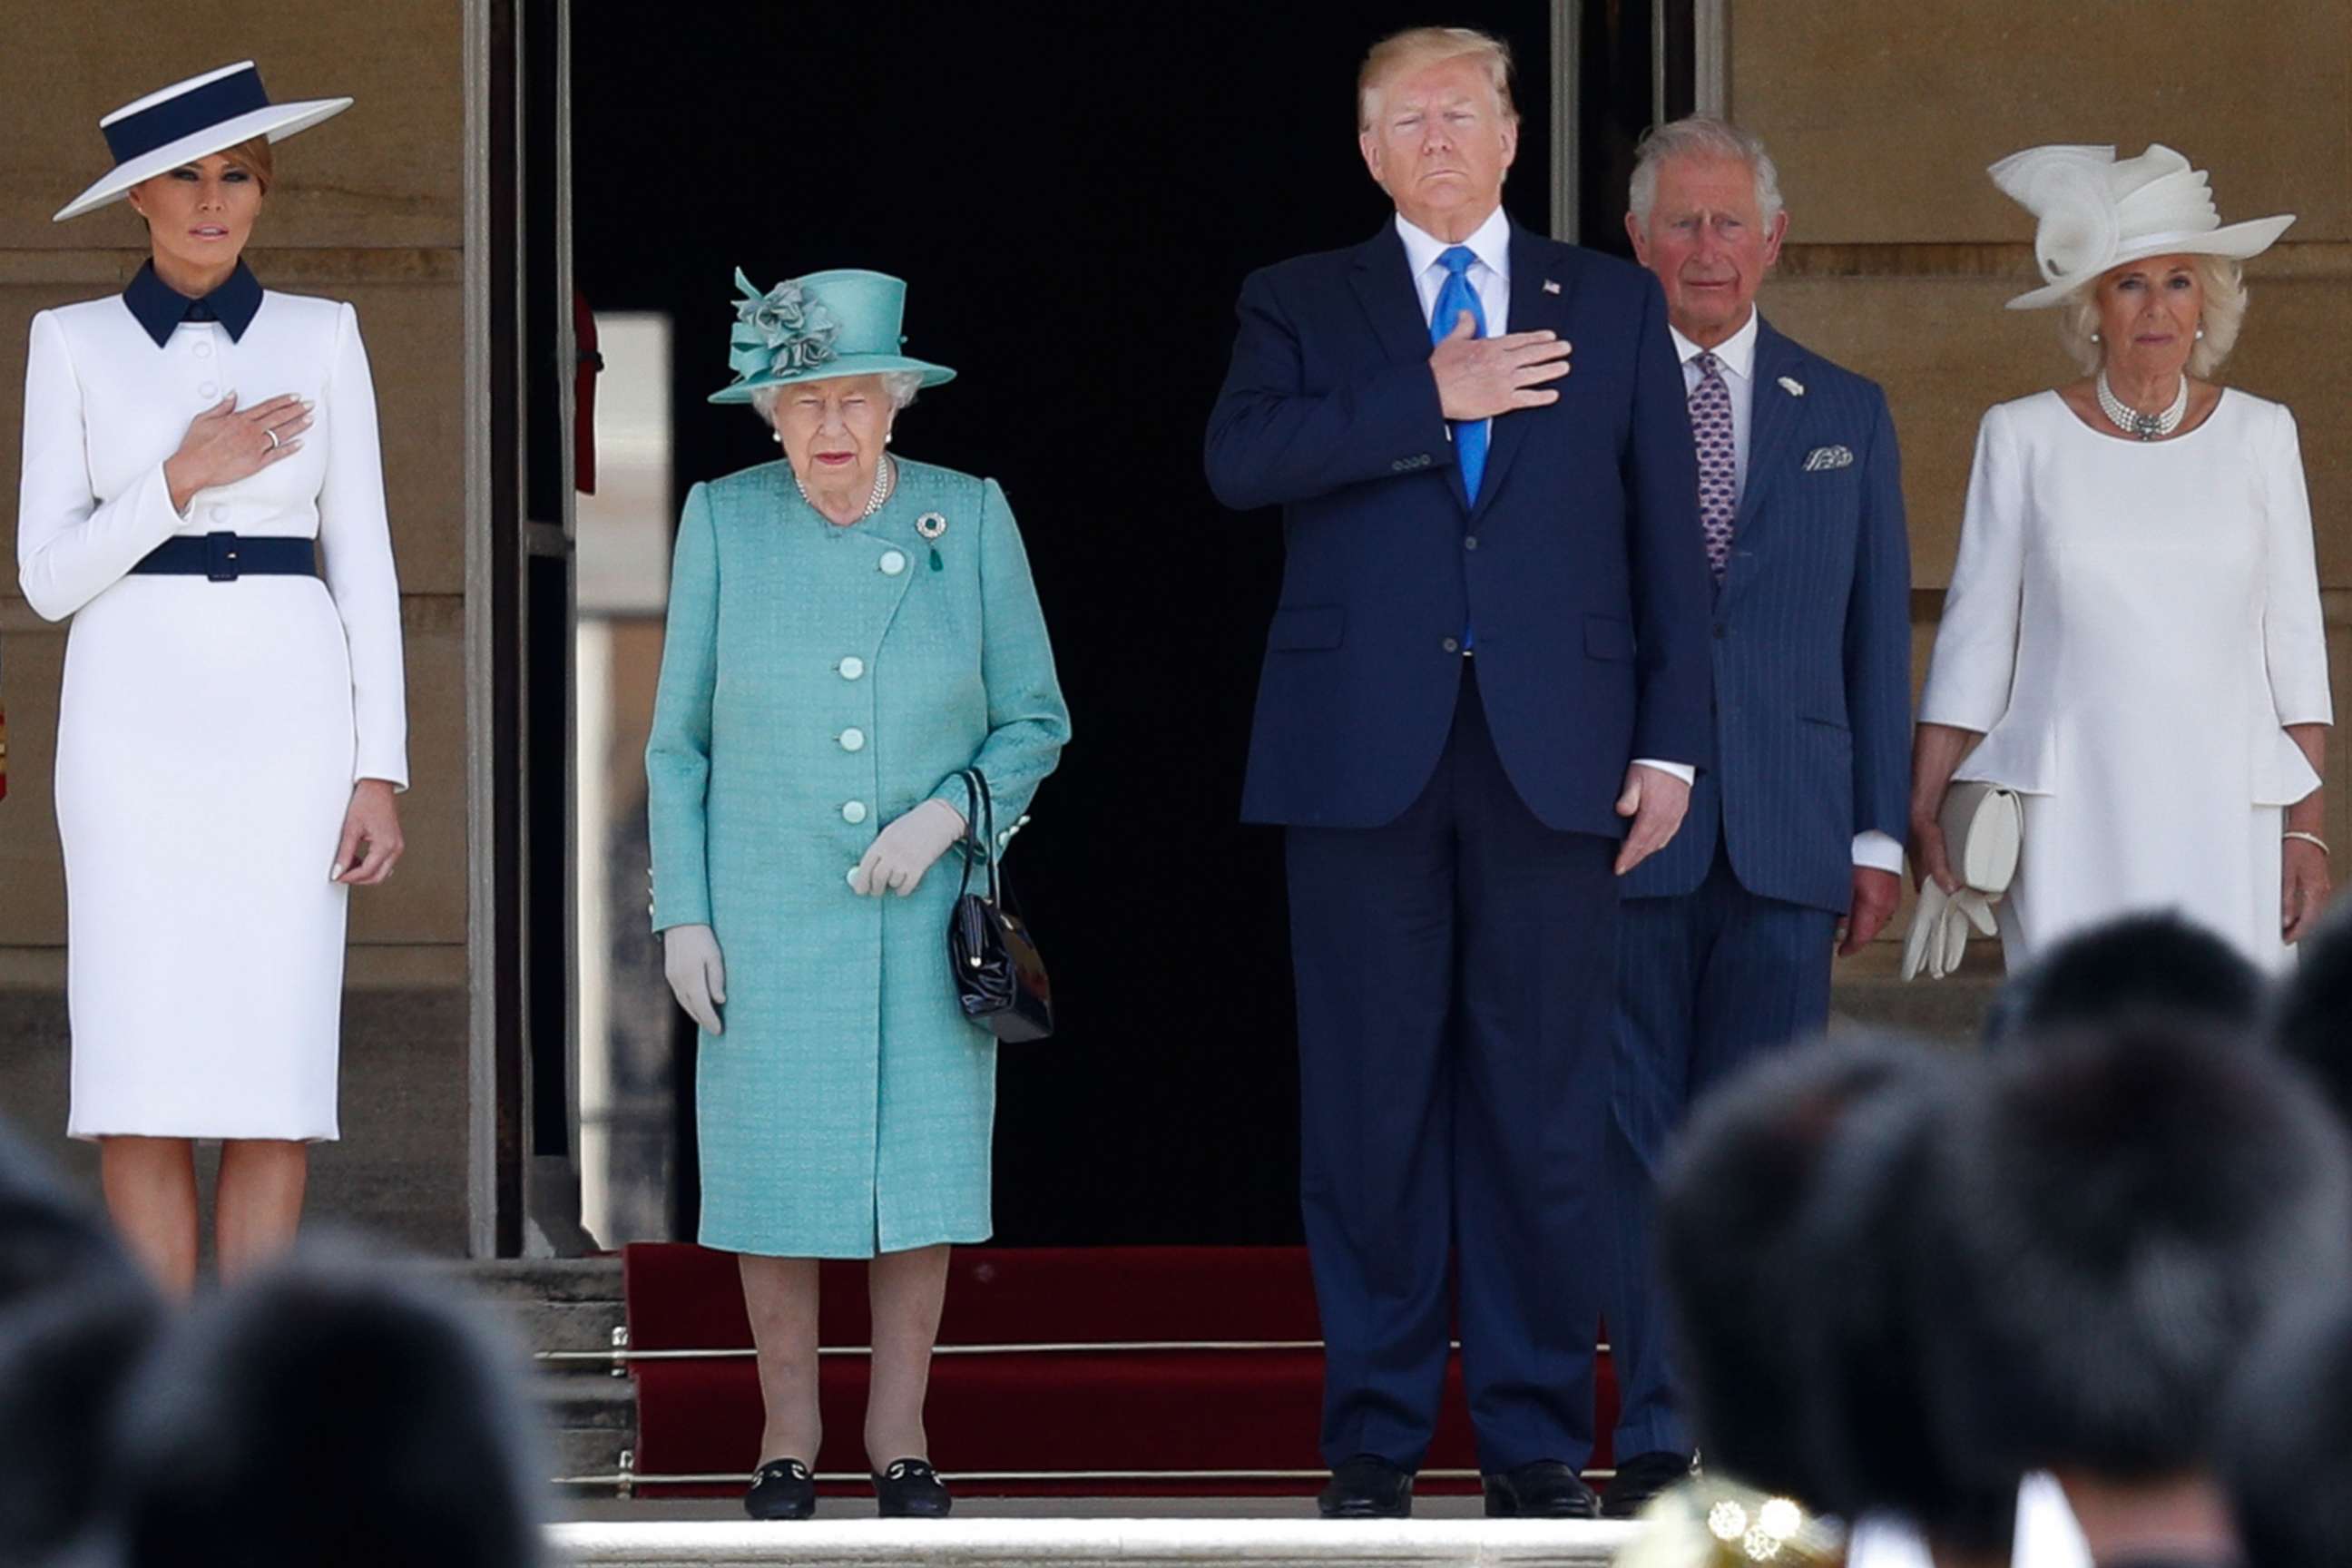 First lady Melania Trump, Britain's Queen Elizabeth II, President Donald Trump, Britain's Prince Charles, Prince of Wales and Britain's Camilla, Duchess of Cornwall stand on the steps during a welcome ceremony at Buckingham Palace in London, June 3, 2019.